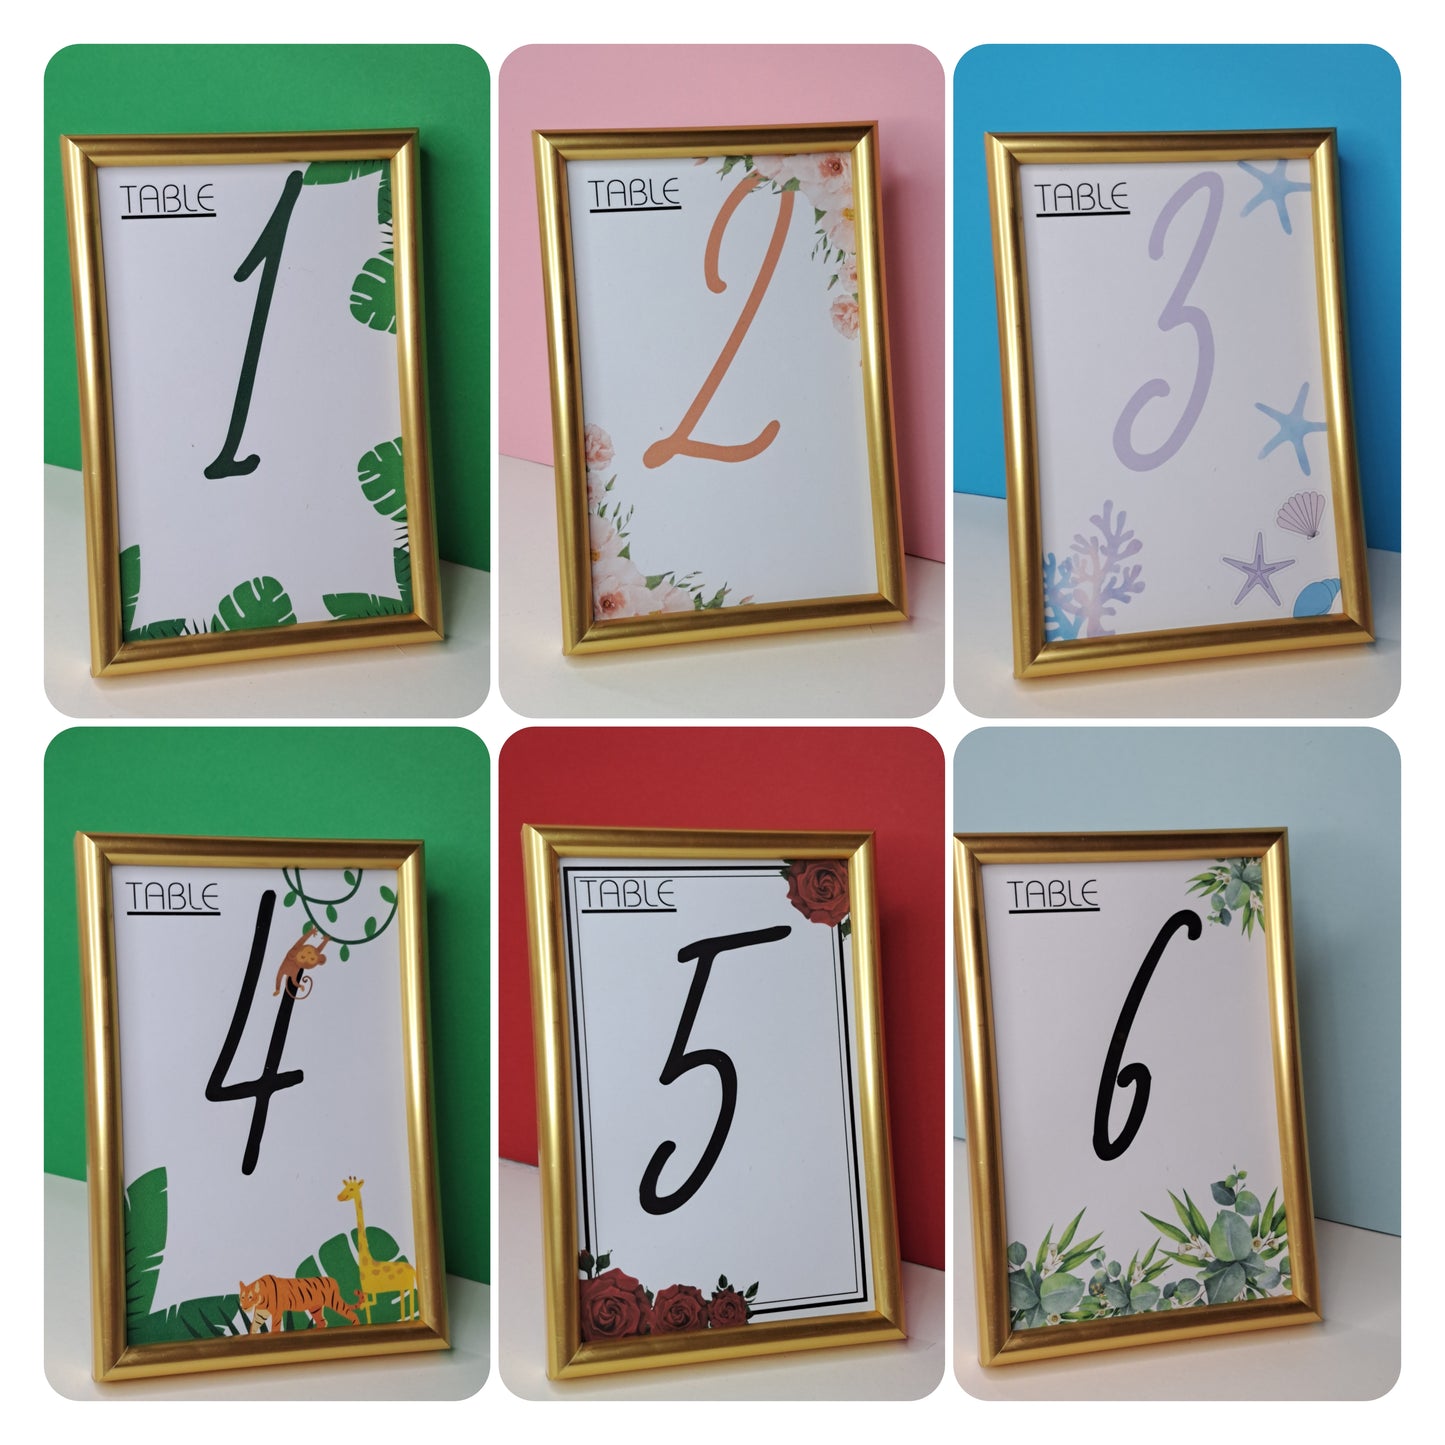 Table numbers in Gold frame